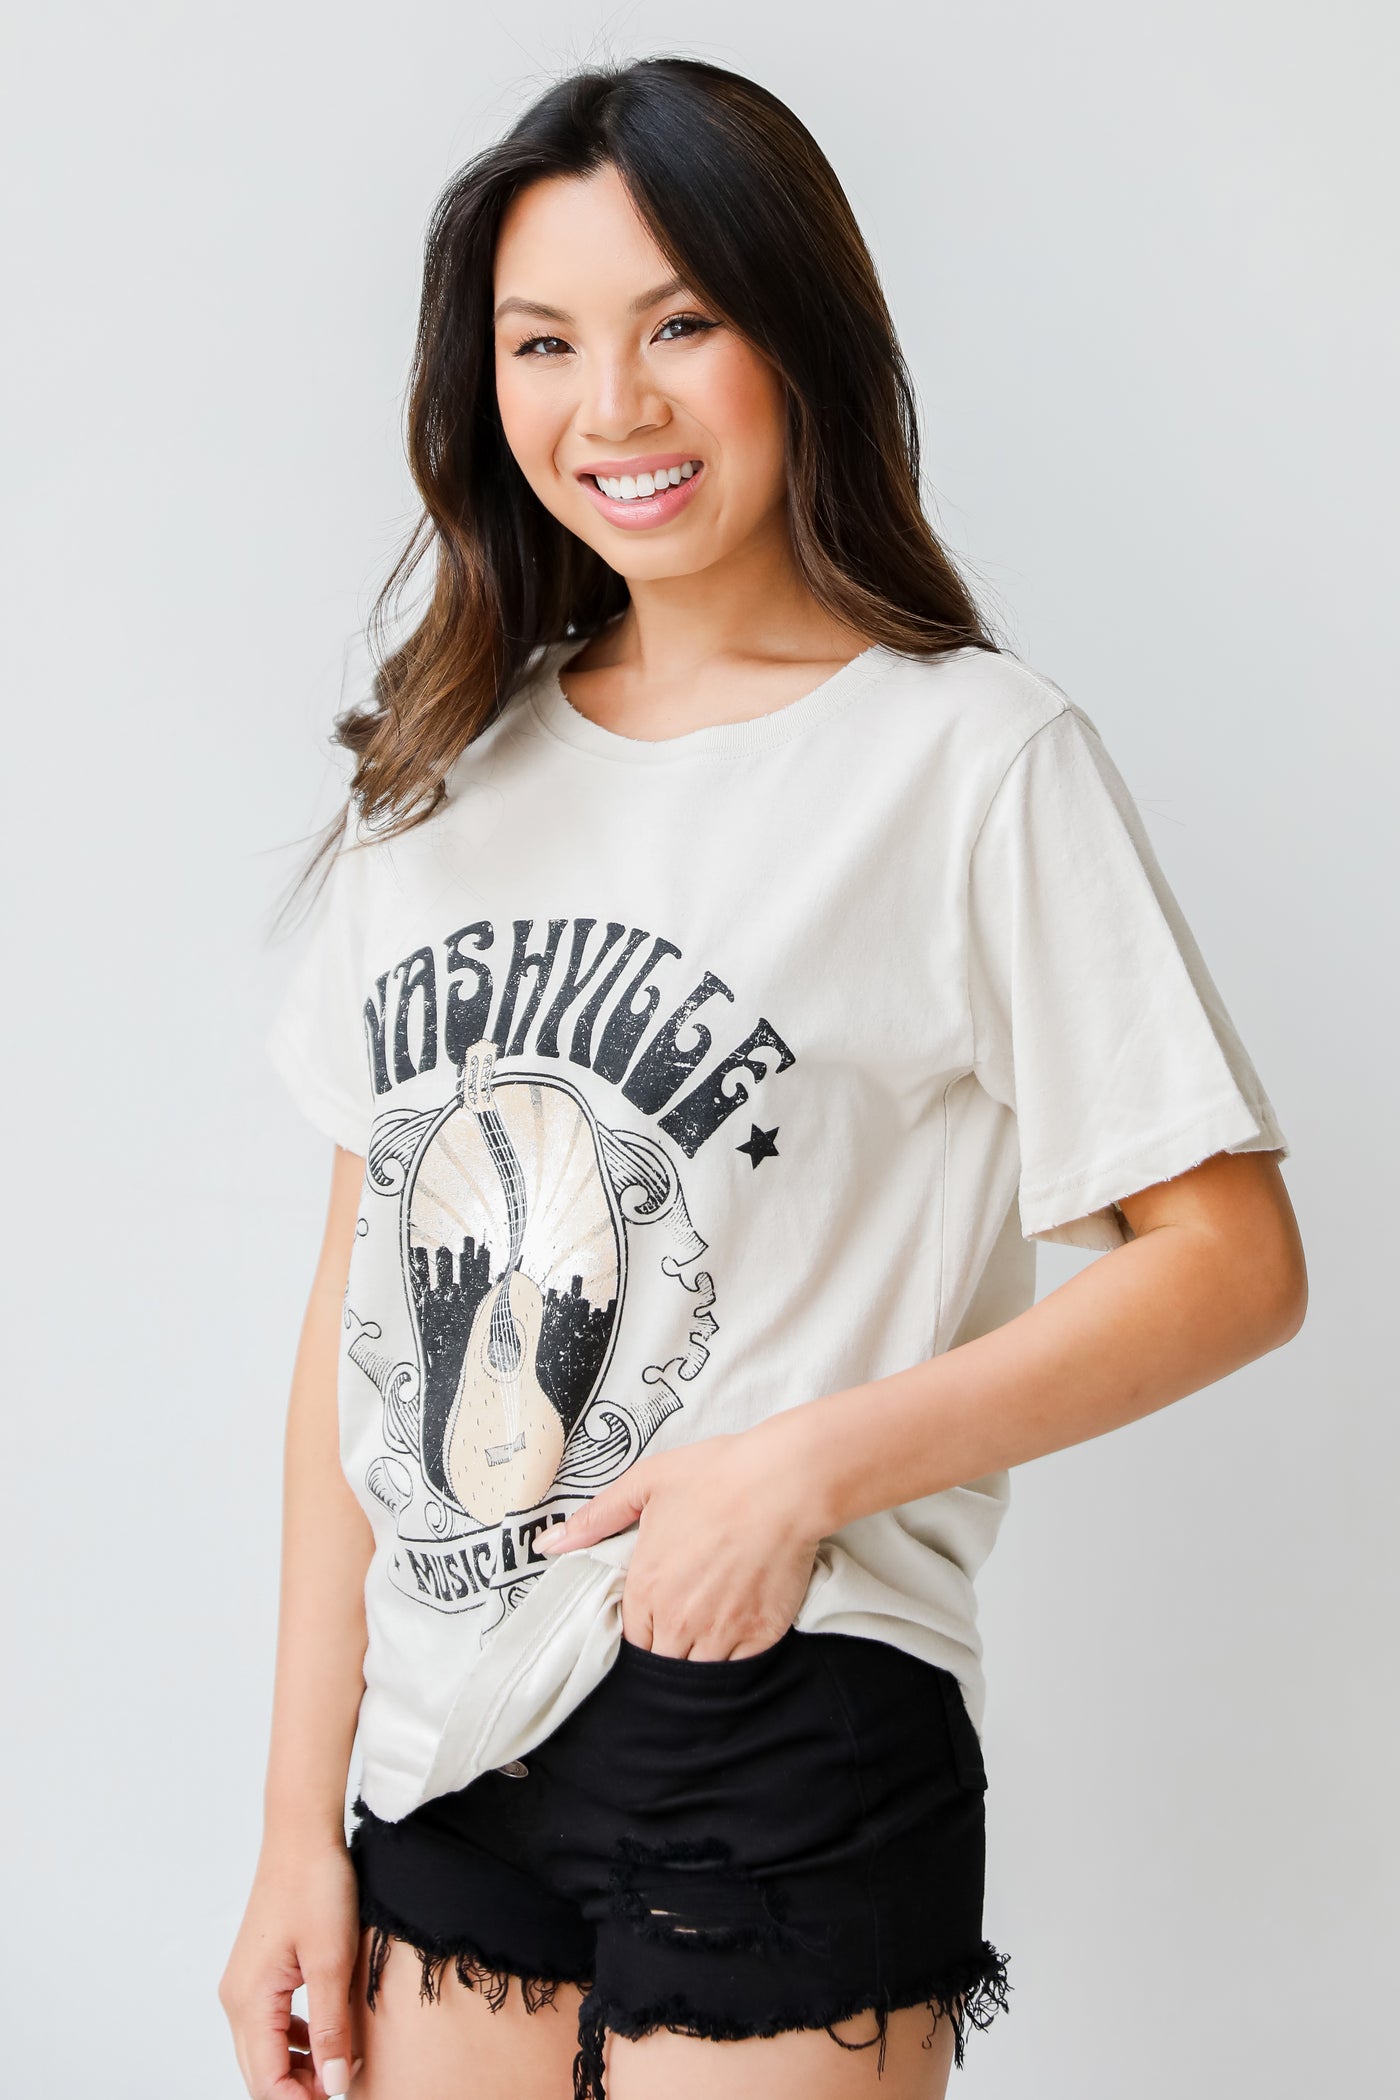 Nashville Vintage Graphic Tee in natural side view